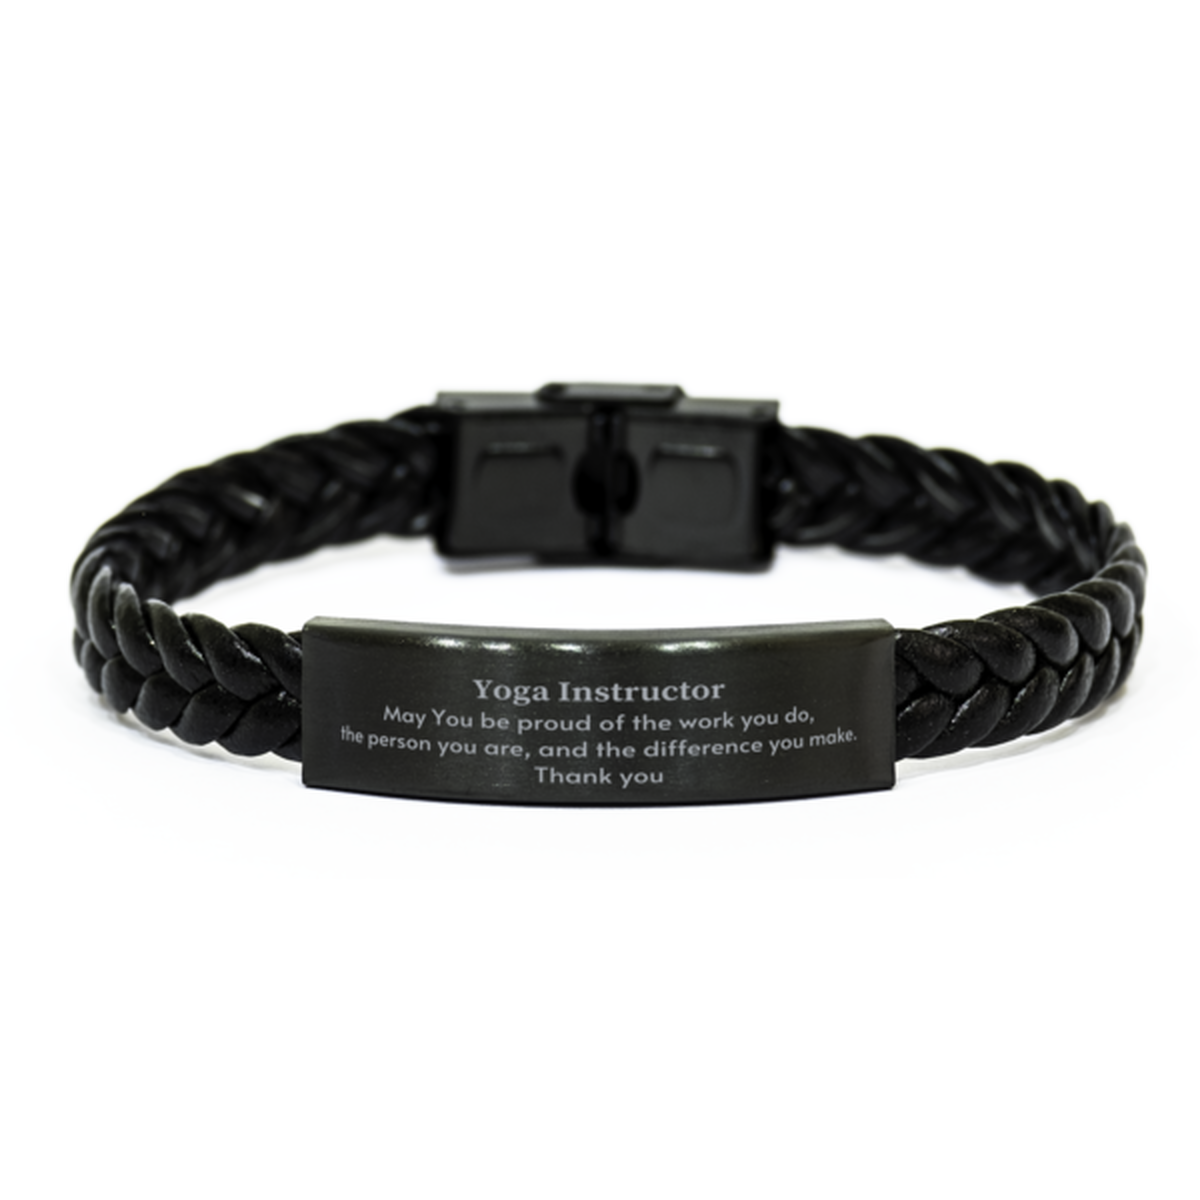 Heartwarming Braided Leather Bracelet Retirement Coworkers Gifts for Yoga Instructor, Yoga Instructor May You be proud of the work you do, the person you are Gifts for Boss Men Women Friends